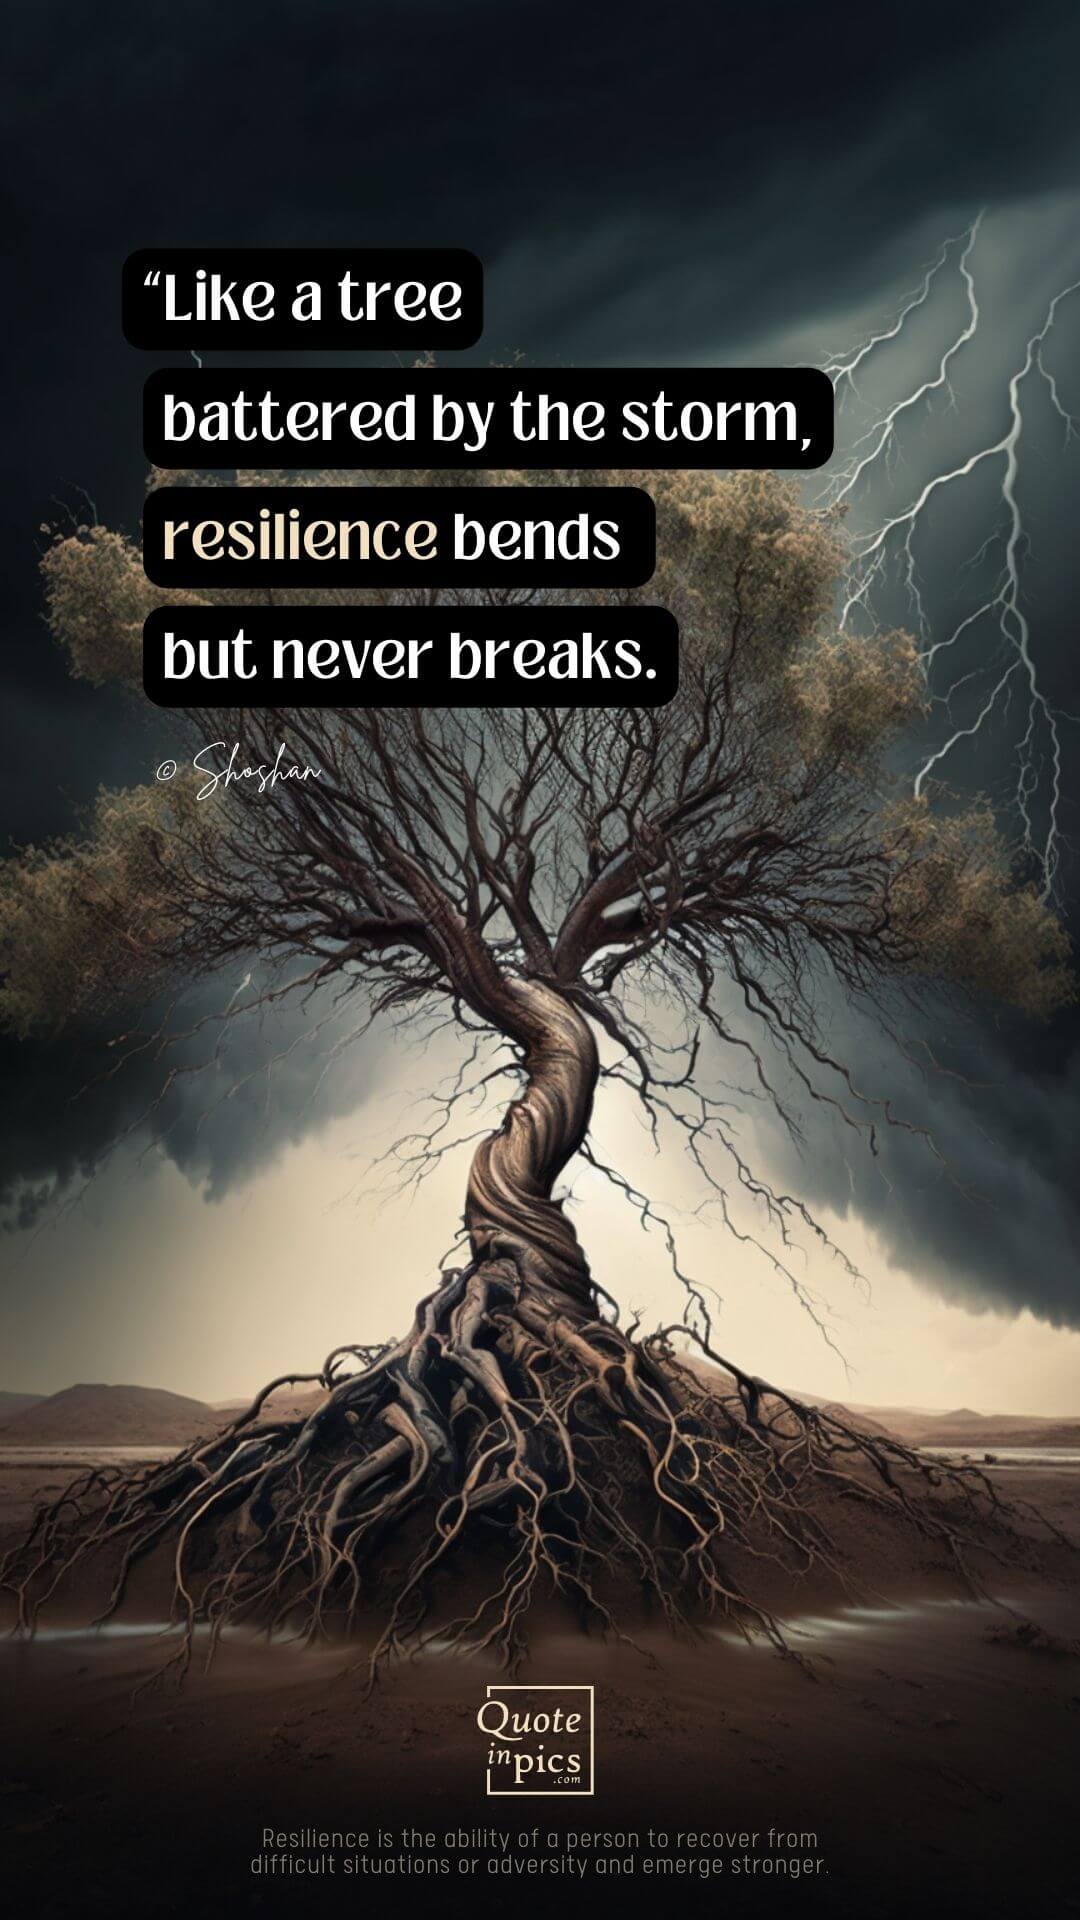 Like a tree battered by the storm, resilience bends but never breaks. -Shoshan